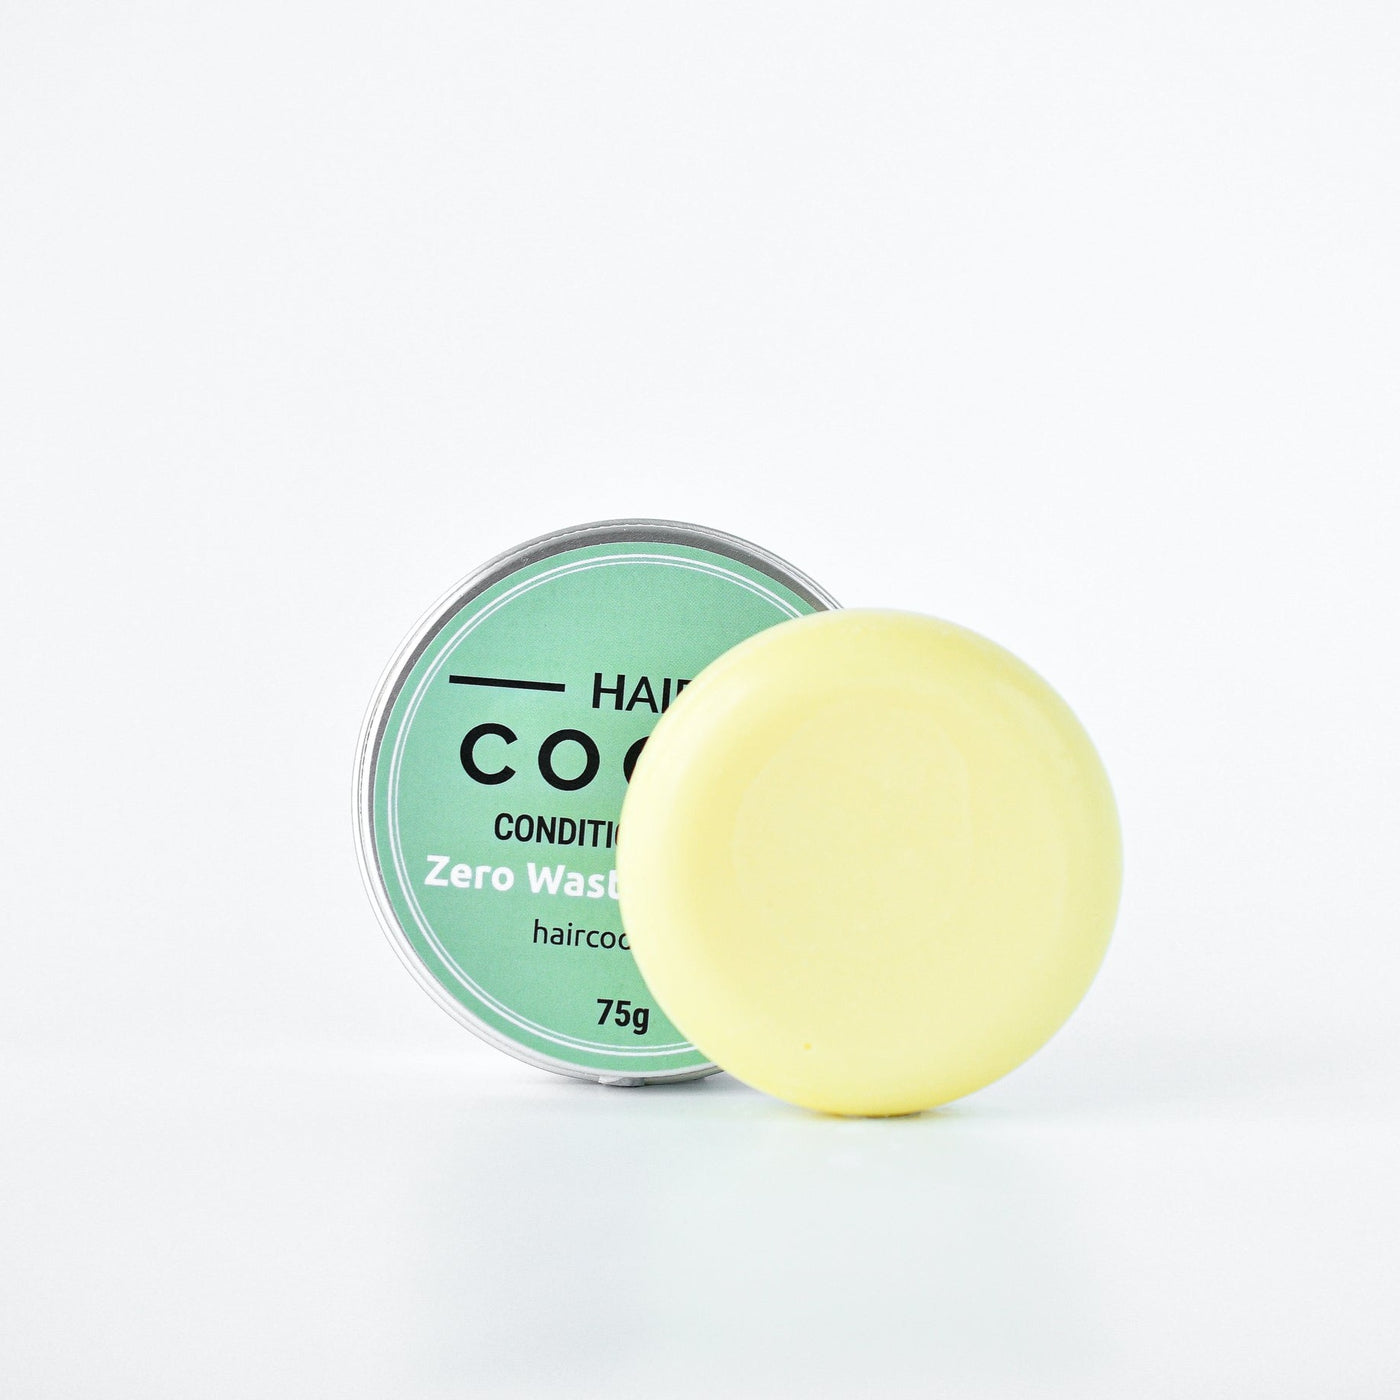 zero waste hair conditioner bar for dry scalps and dandruff